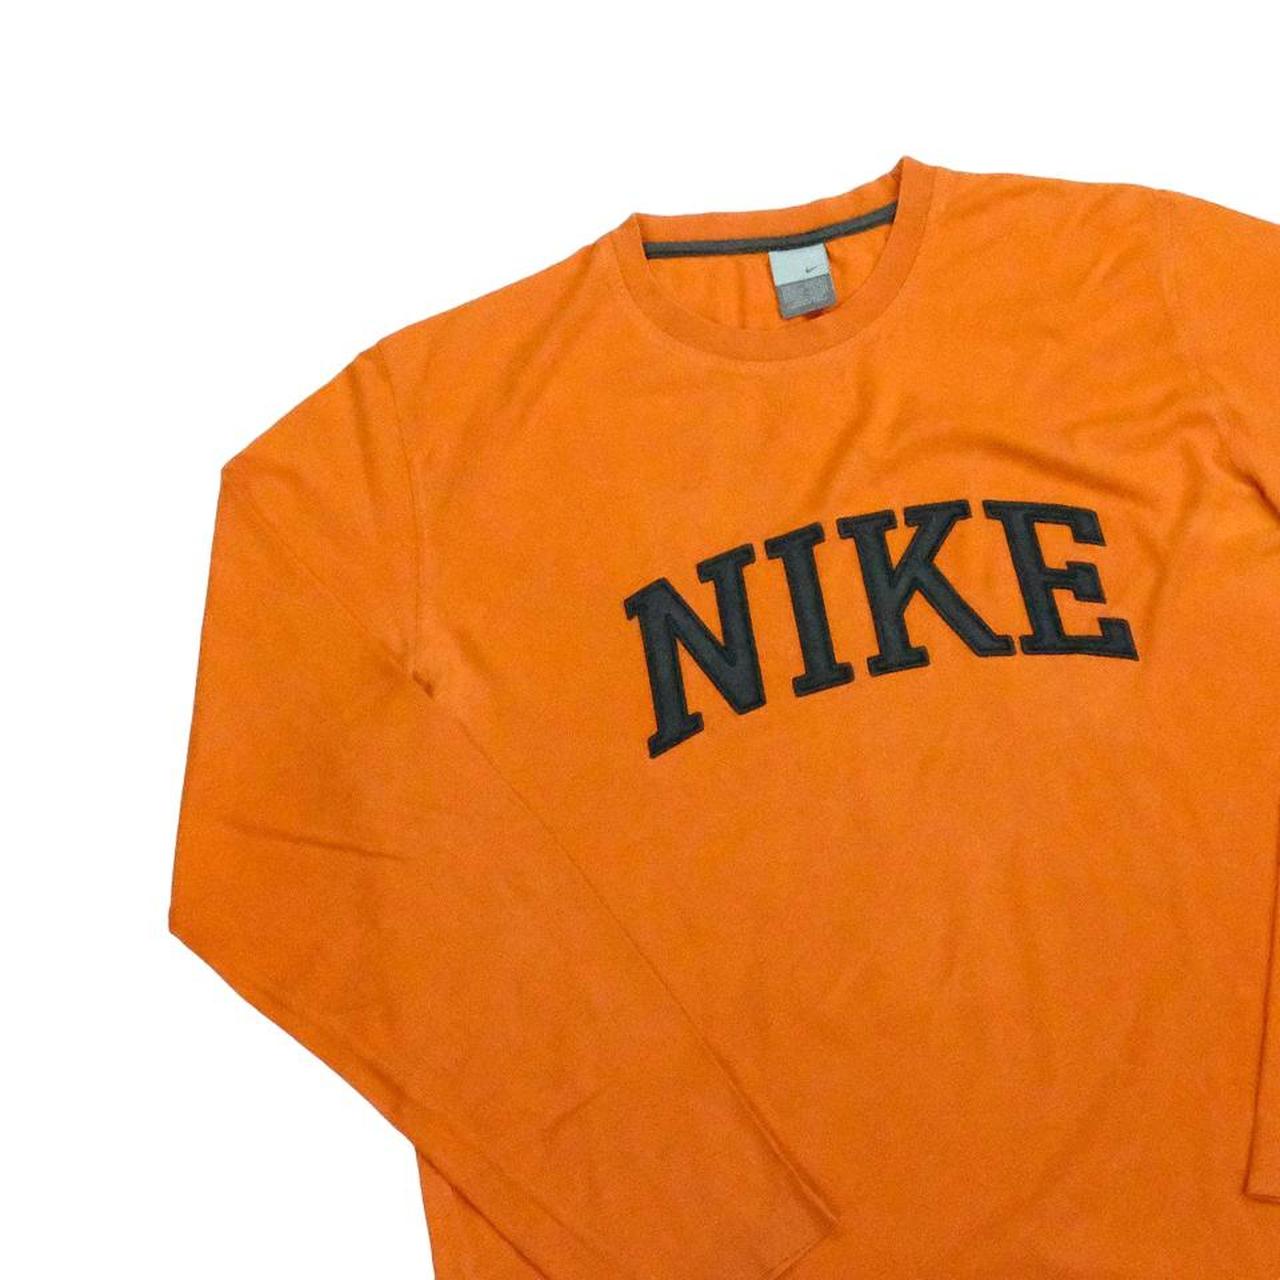 Y2K Nike spell out top